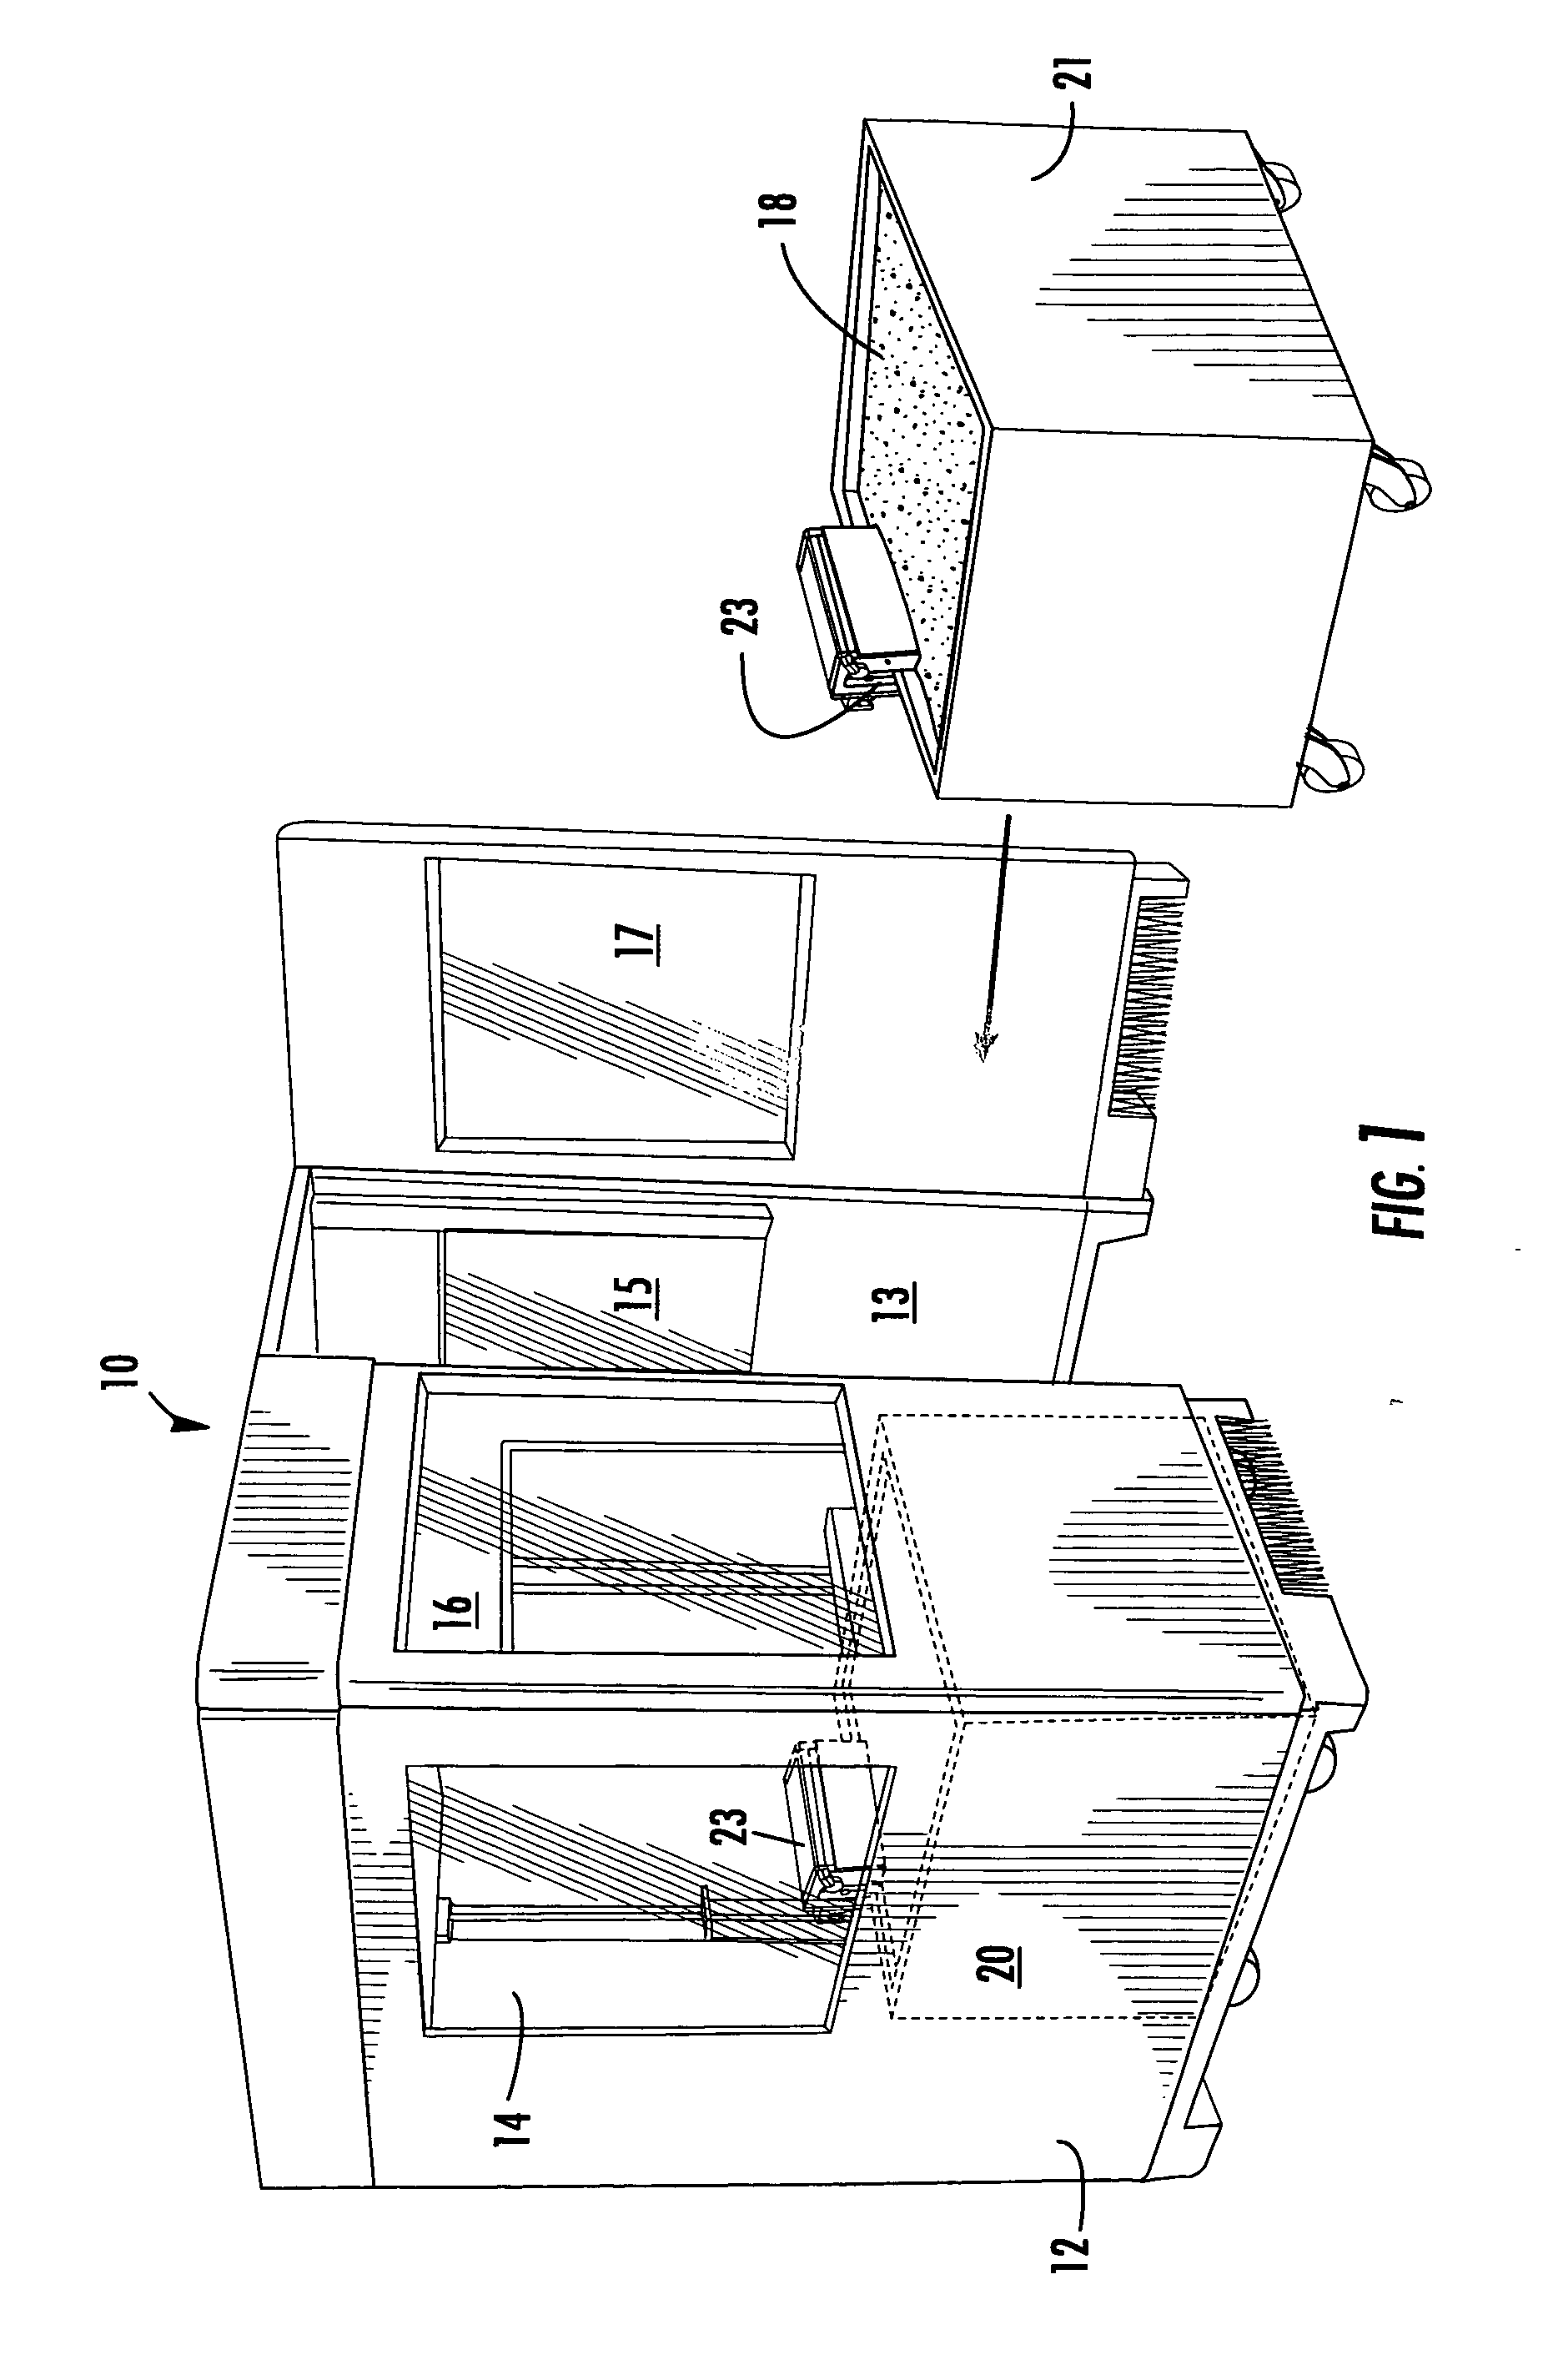 Rapid prototyping and manufacturing system and method